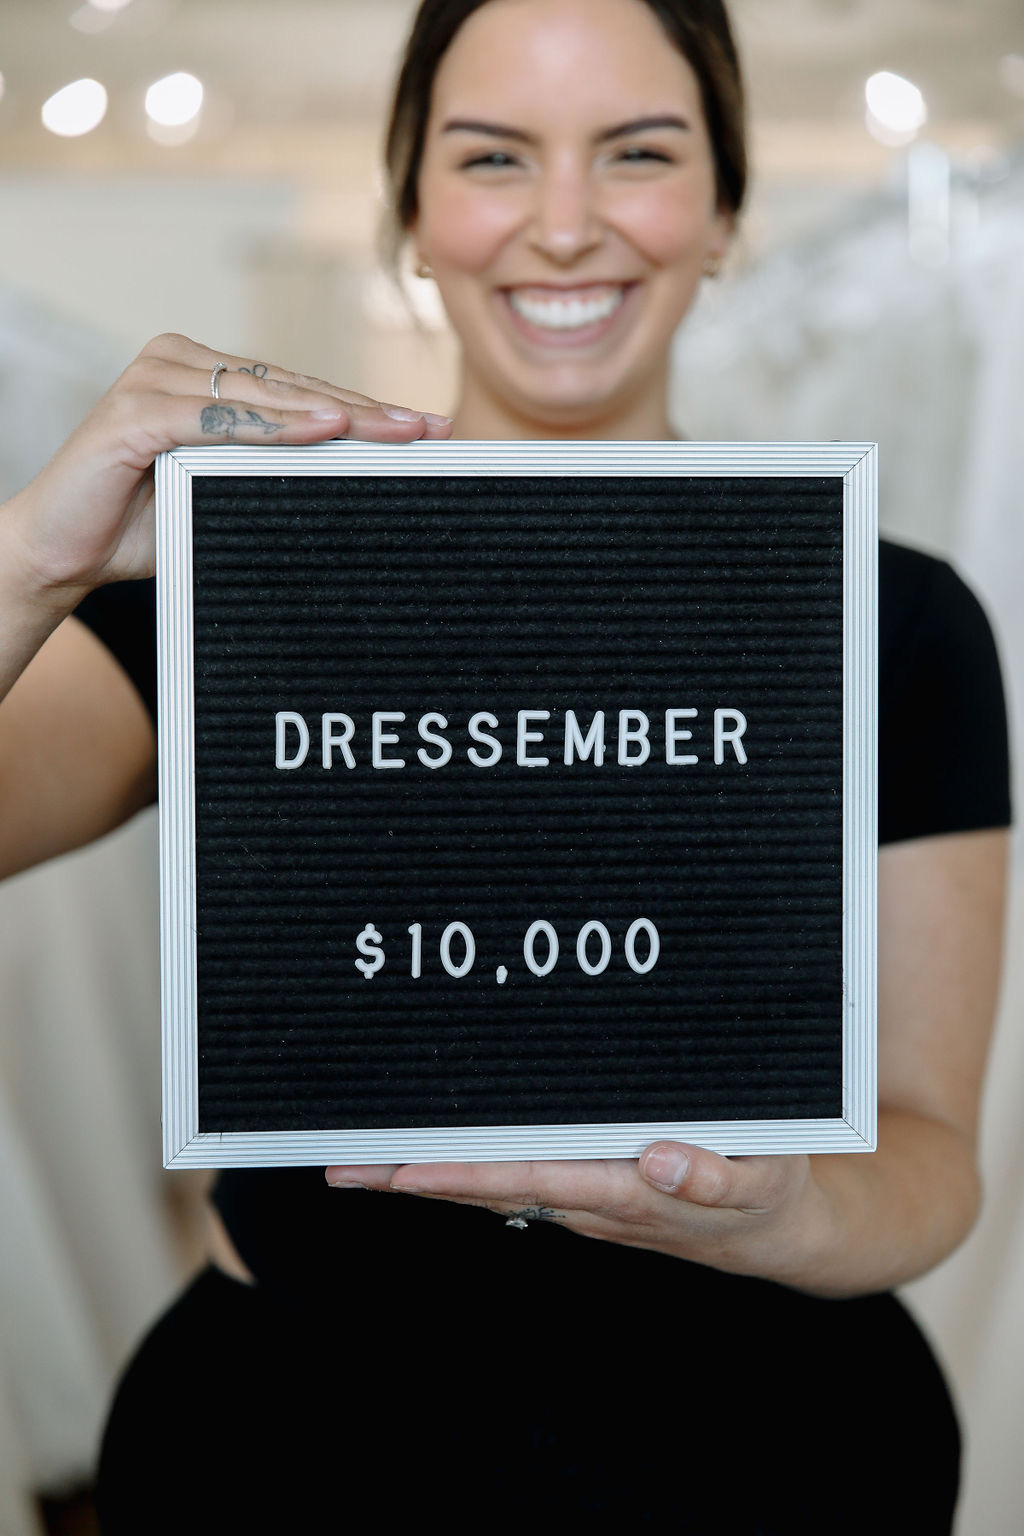 2022 Gift of $10,000 to Dressember!